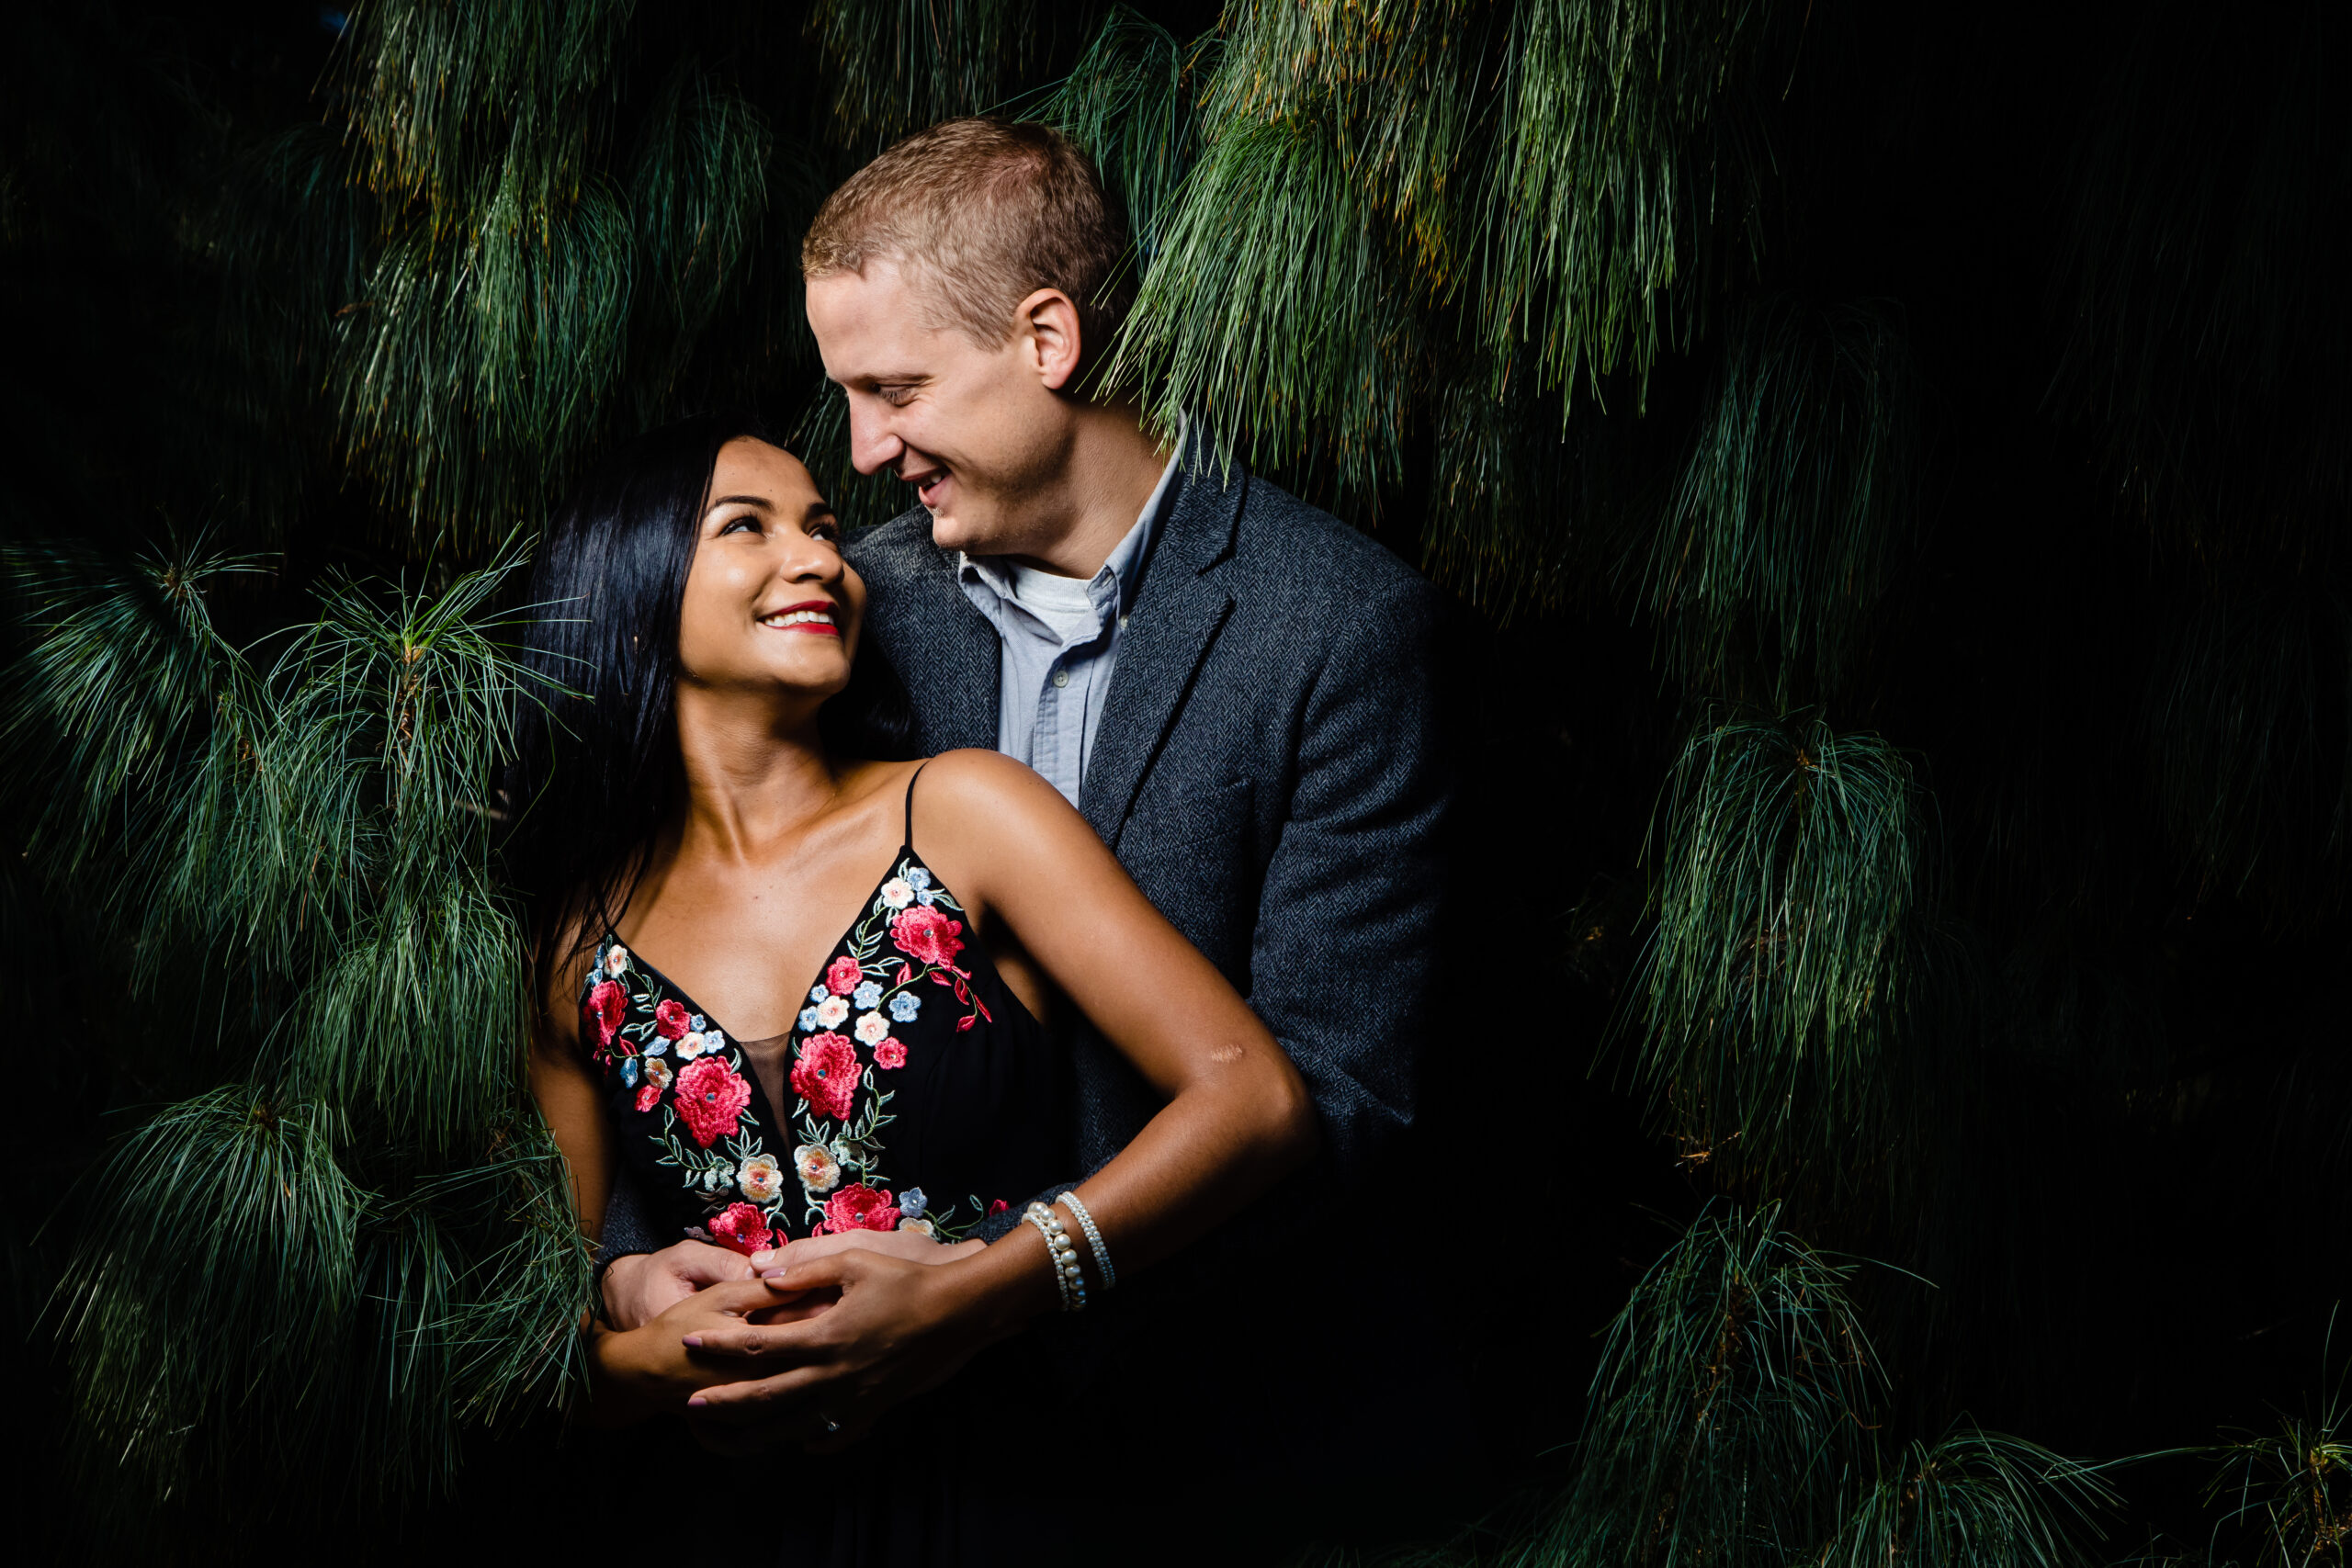 A romantic engagement moment captured in Washington DC as the couple gazes into each other's eyes with joyful smiles, surrounded by lush green trees. This enchanting scene was skillfully photographed by North Jersey wedding photographer Jarot Bocanegra